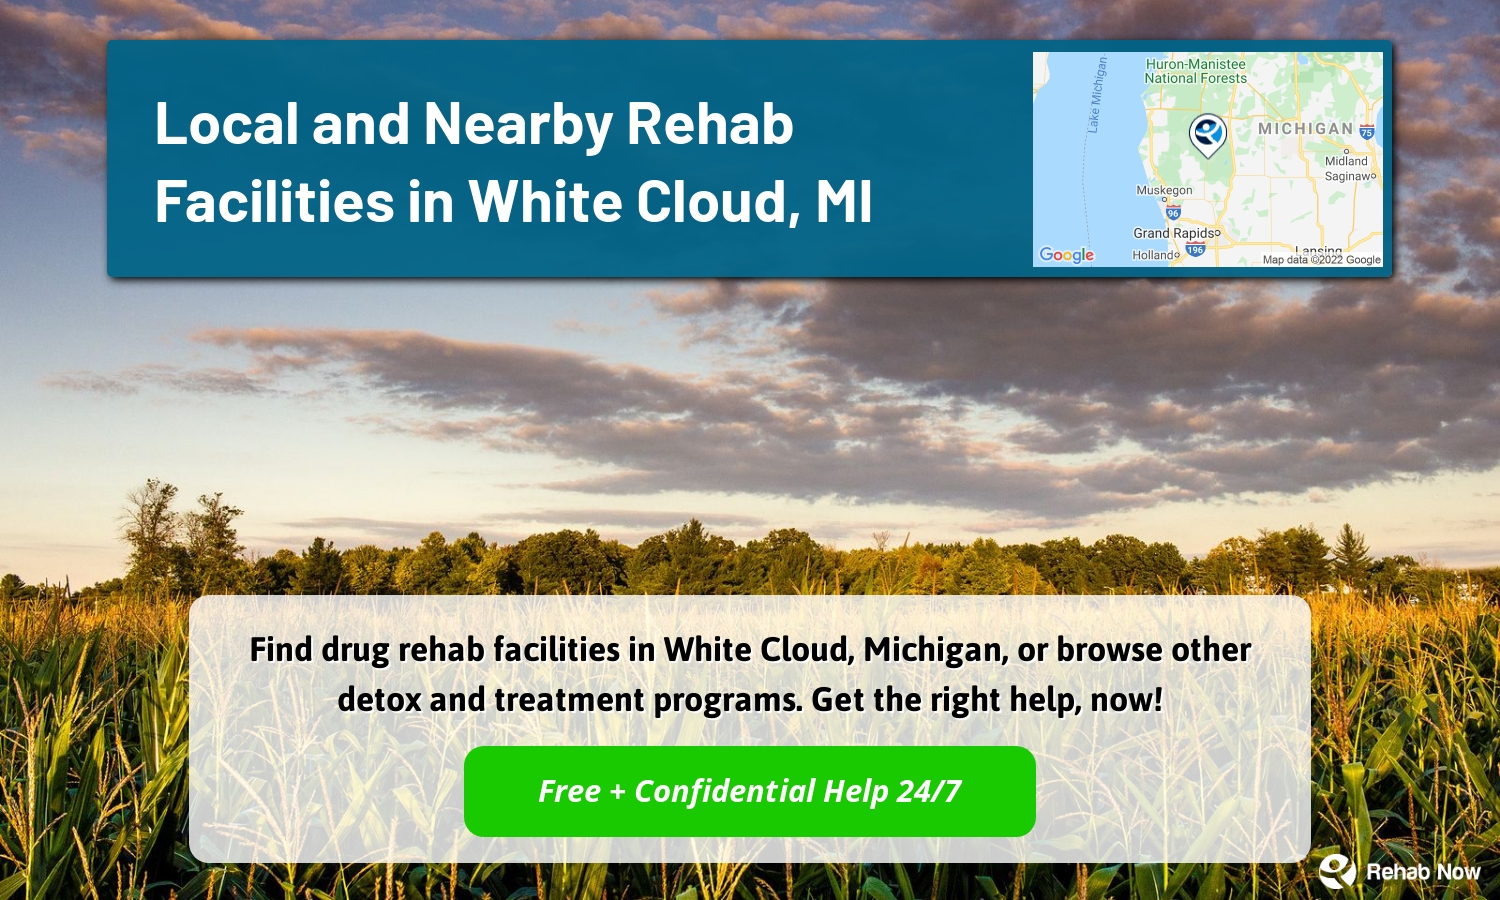 Find drug rehab facilities in White Cloud, Michigan, or browse other detox and treatment programs. Get the right help, now!